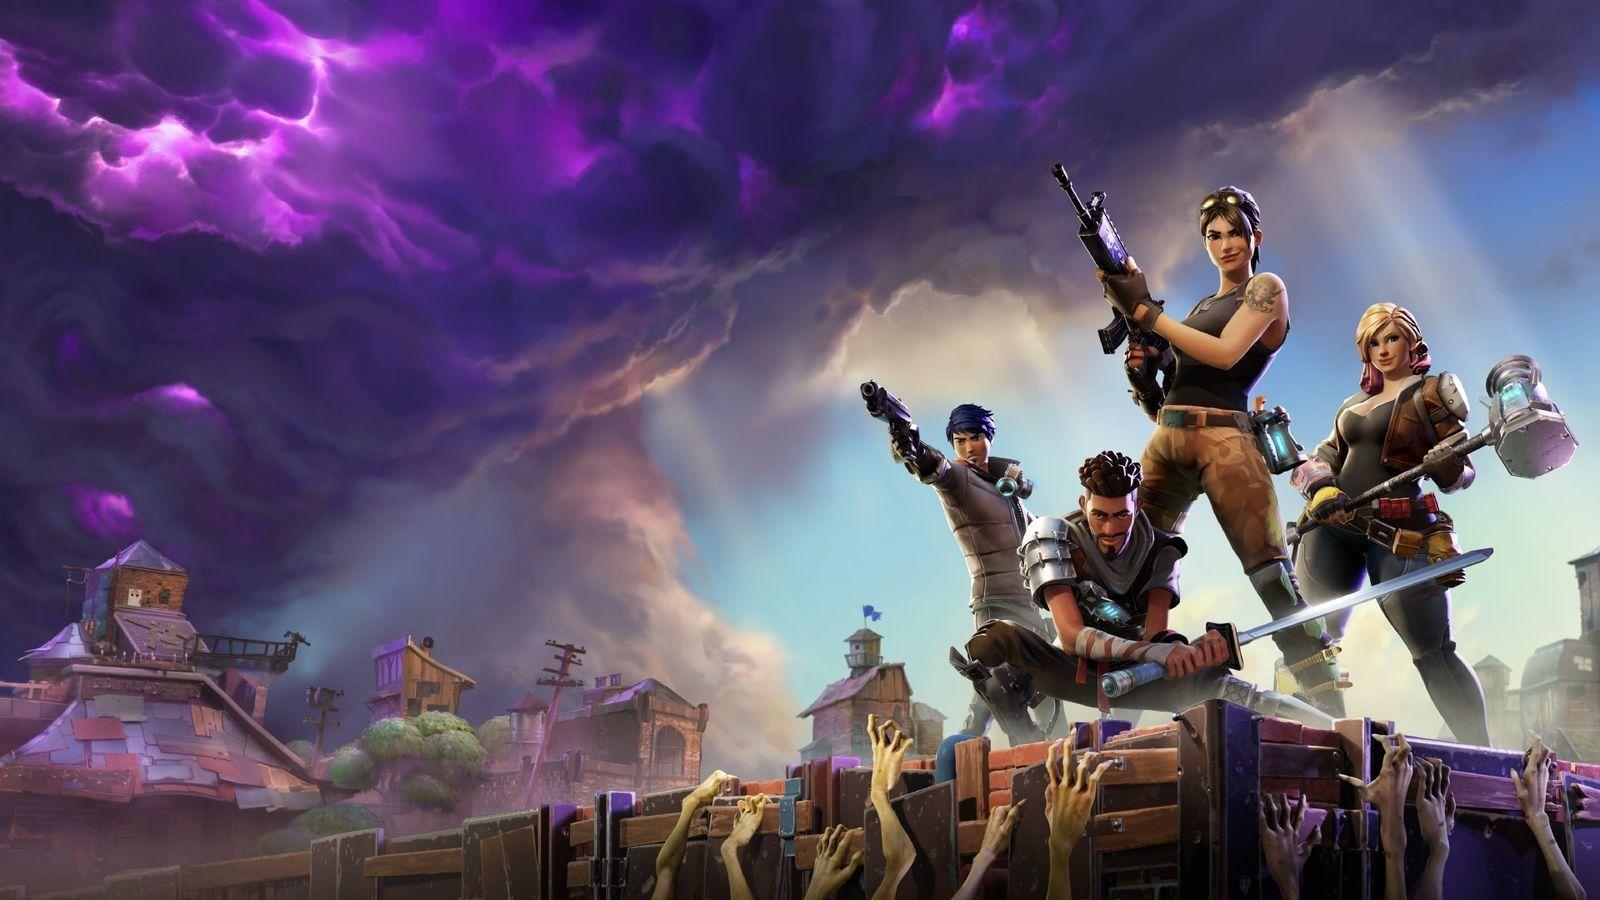 Mixer's HypeZone expands to include Fortnite Battle Royale action